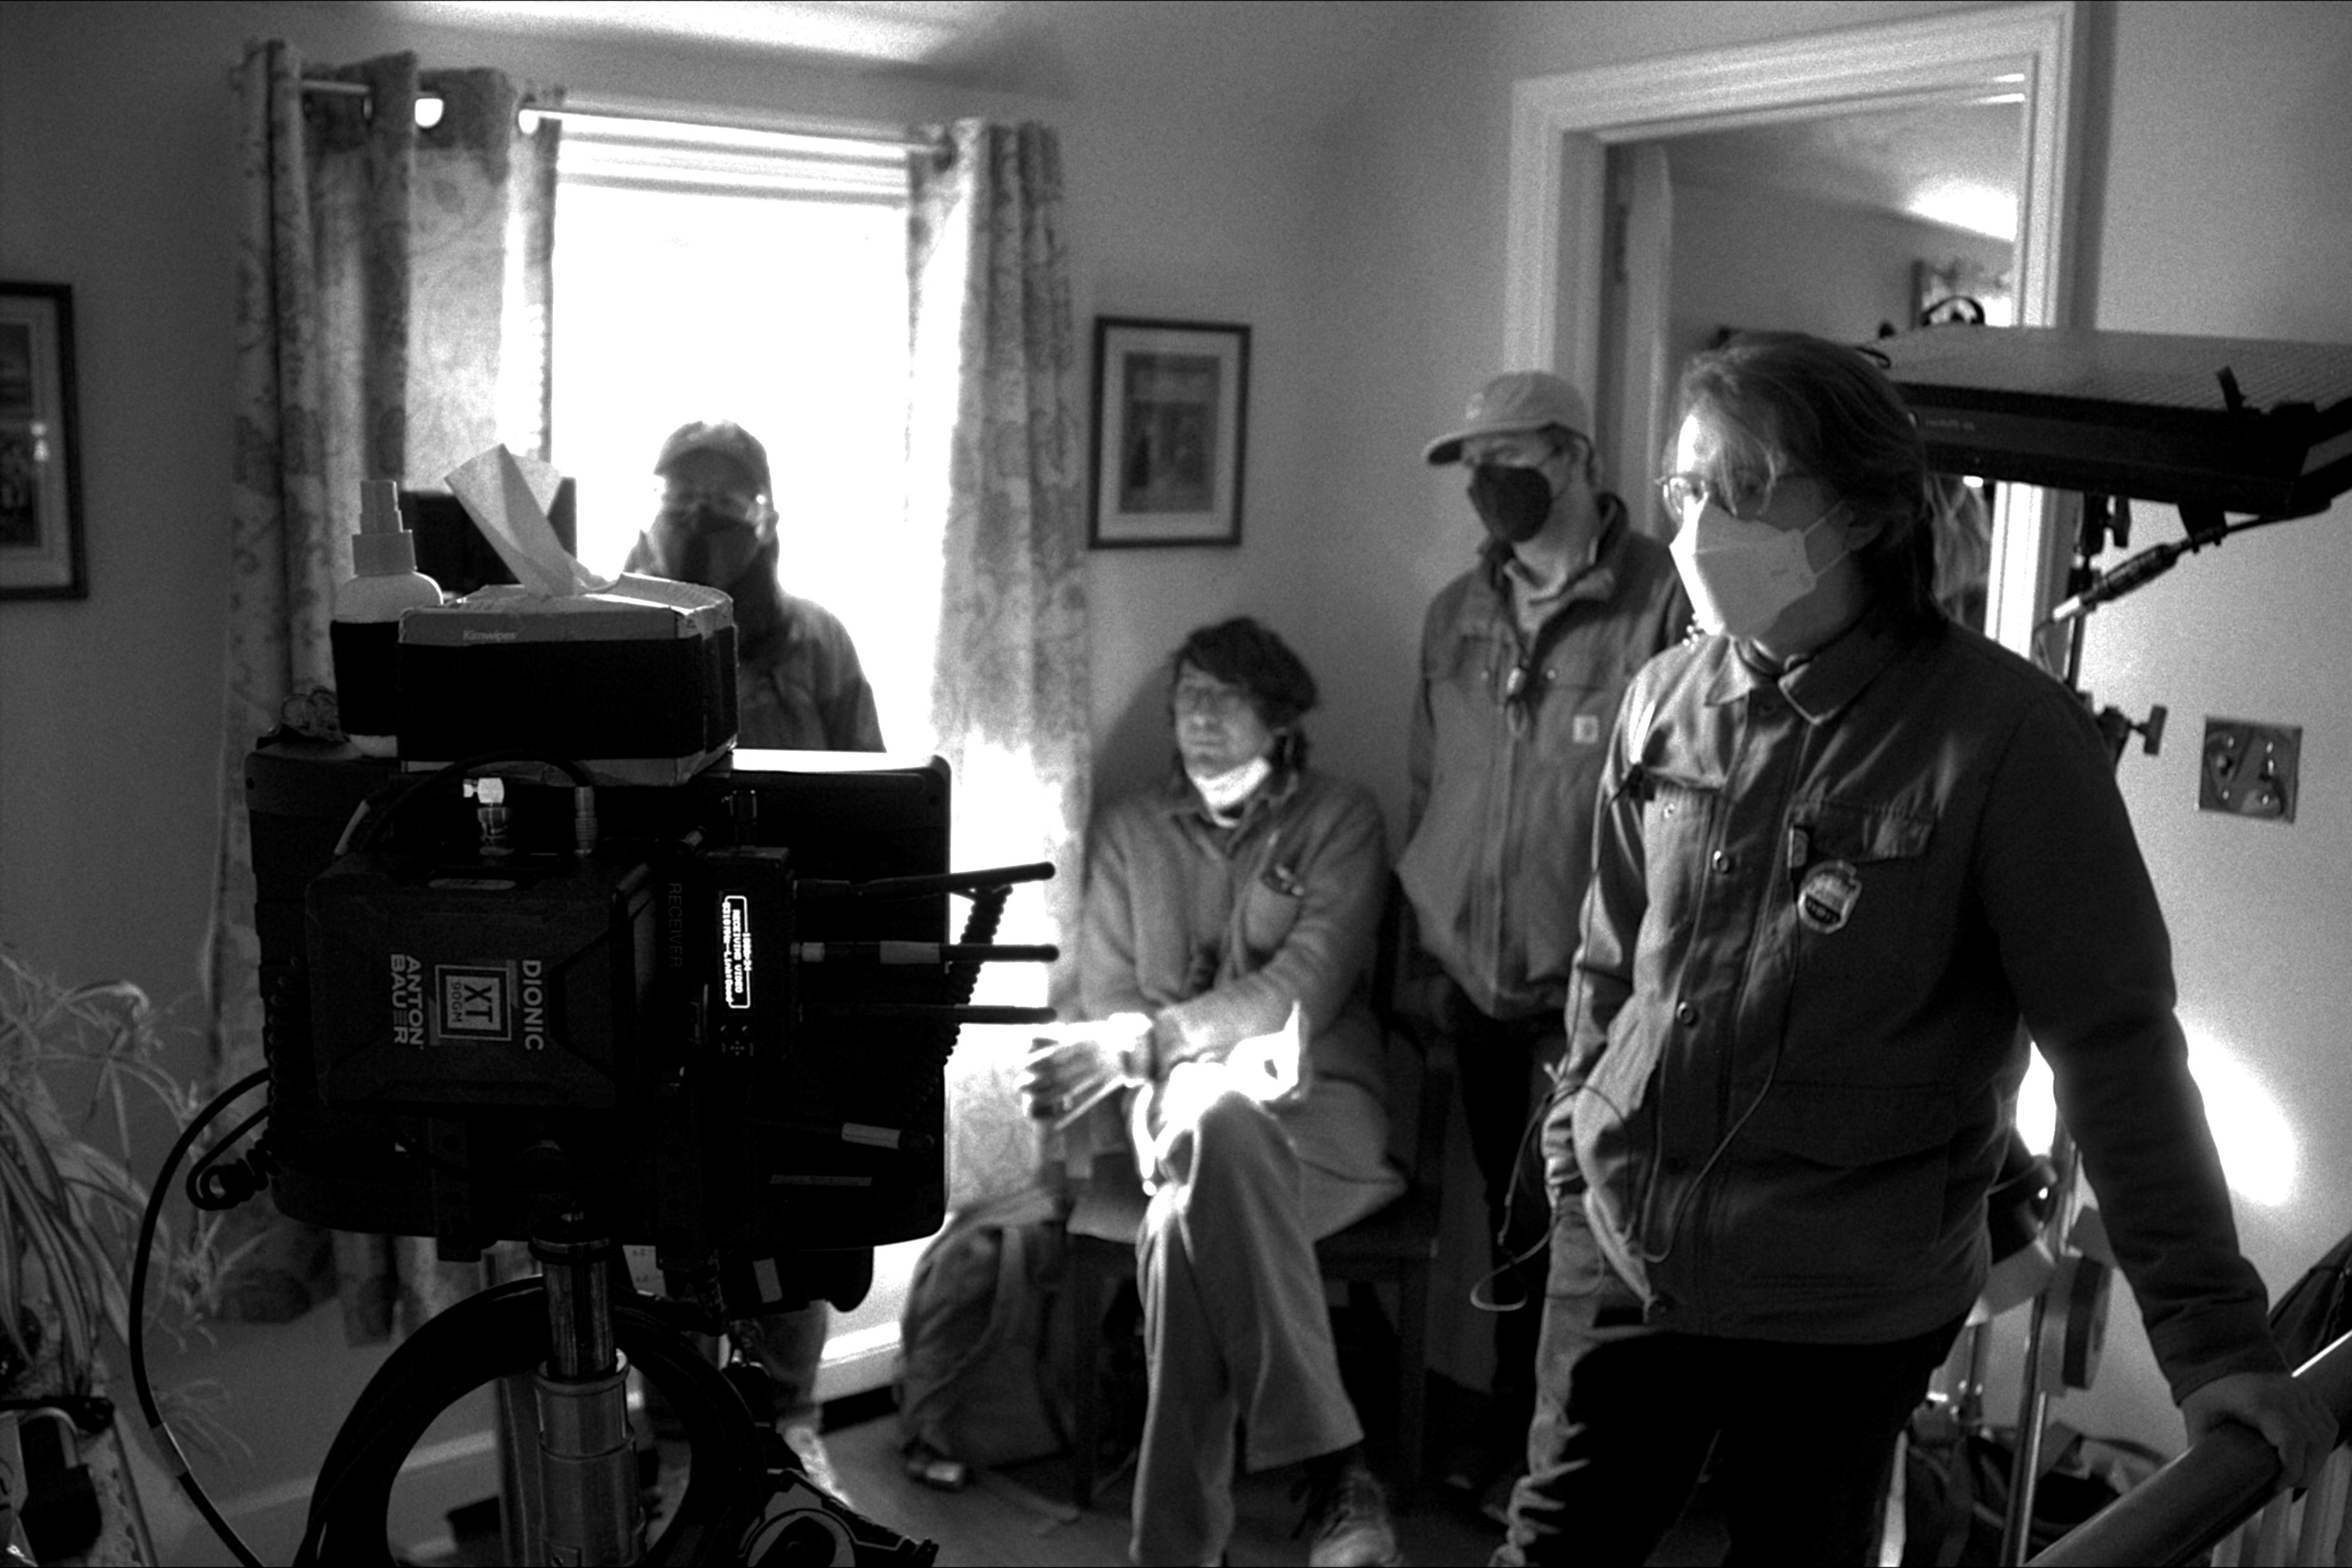 Director Owen Kline (center) and Shane Fleming (right) watching monitors during a take. Photo courtesy of Shane Fleming. Taken by Geoffrey Duncanson.